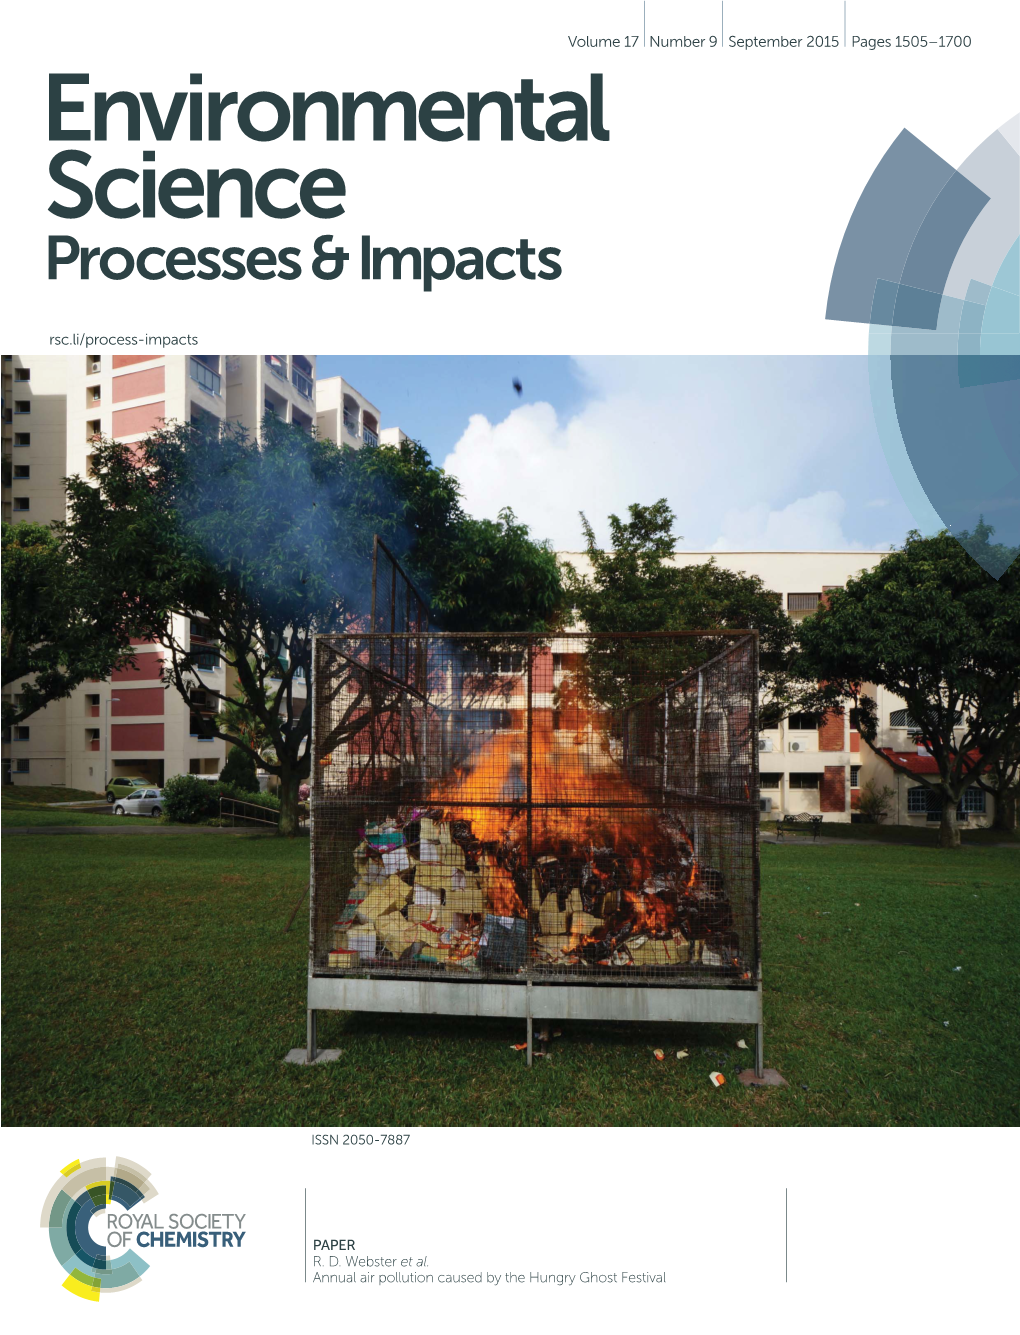 Annual Air Pollution Caused by the Hungry Ghost Festival Environmental Science Processes & Impacts